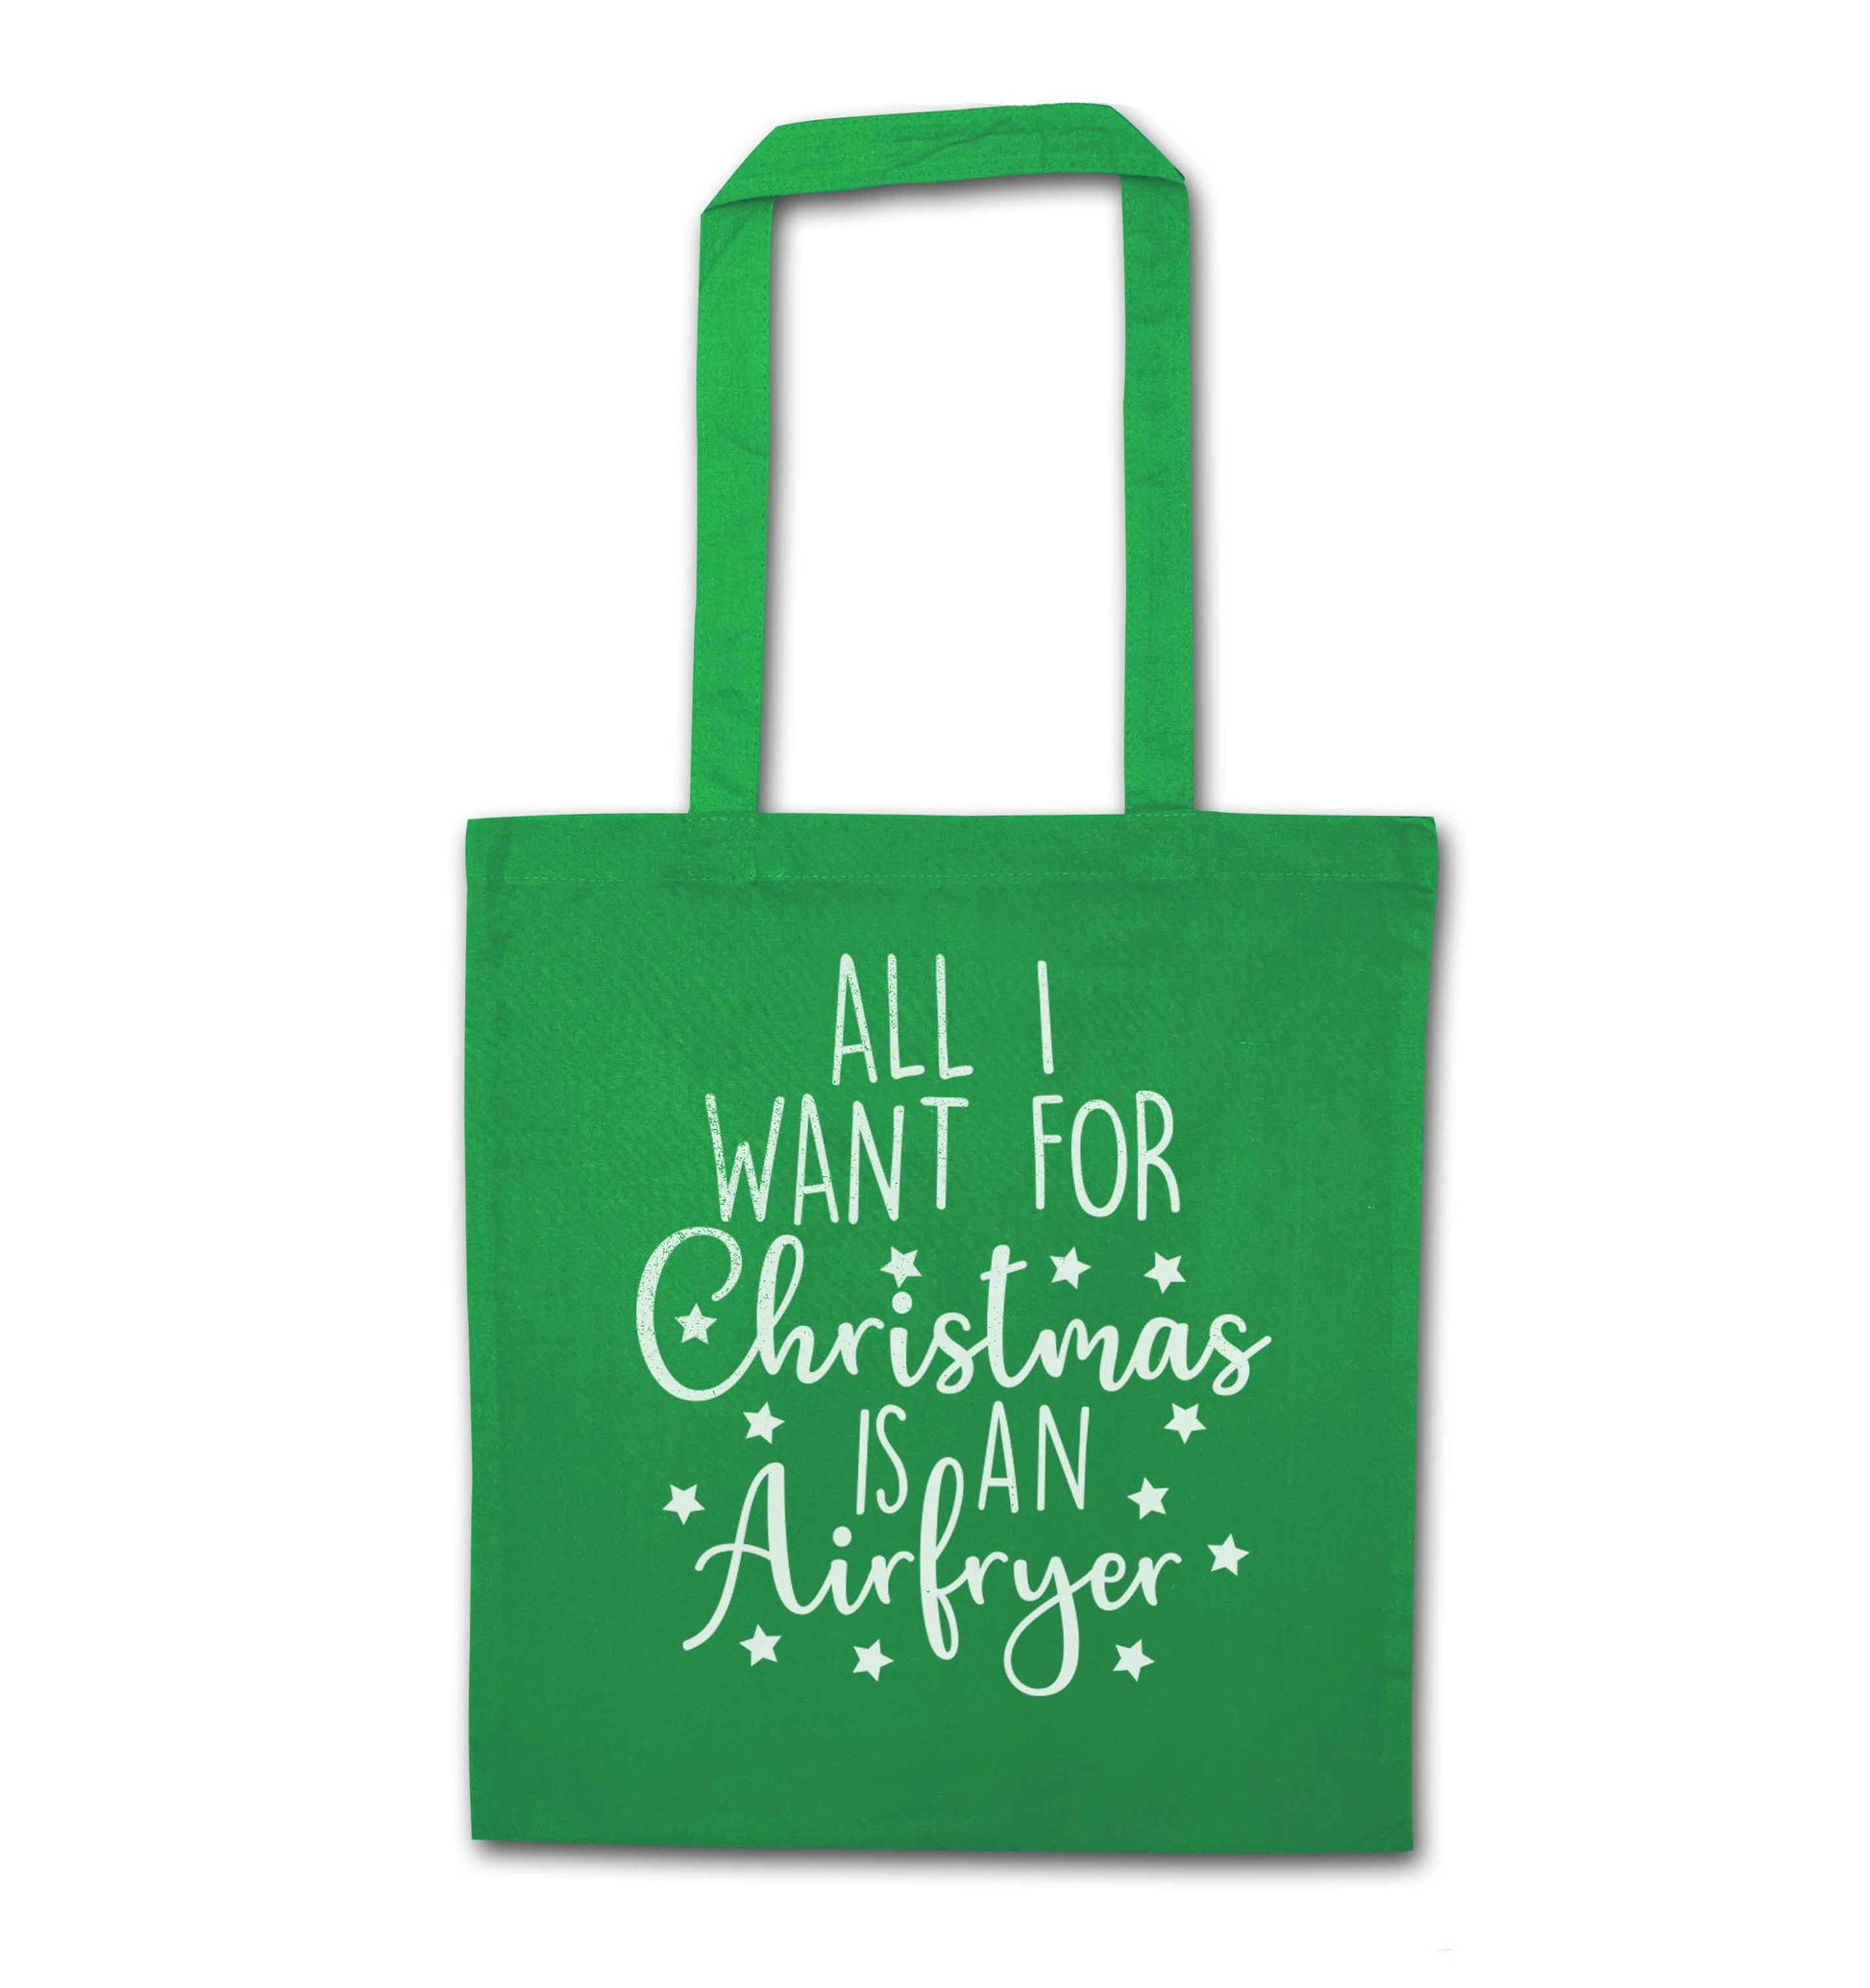 All I want for Christmas is an airfryergreen tote bag